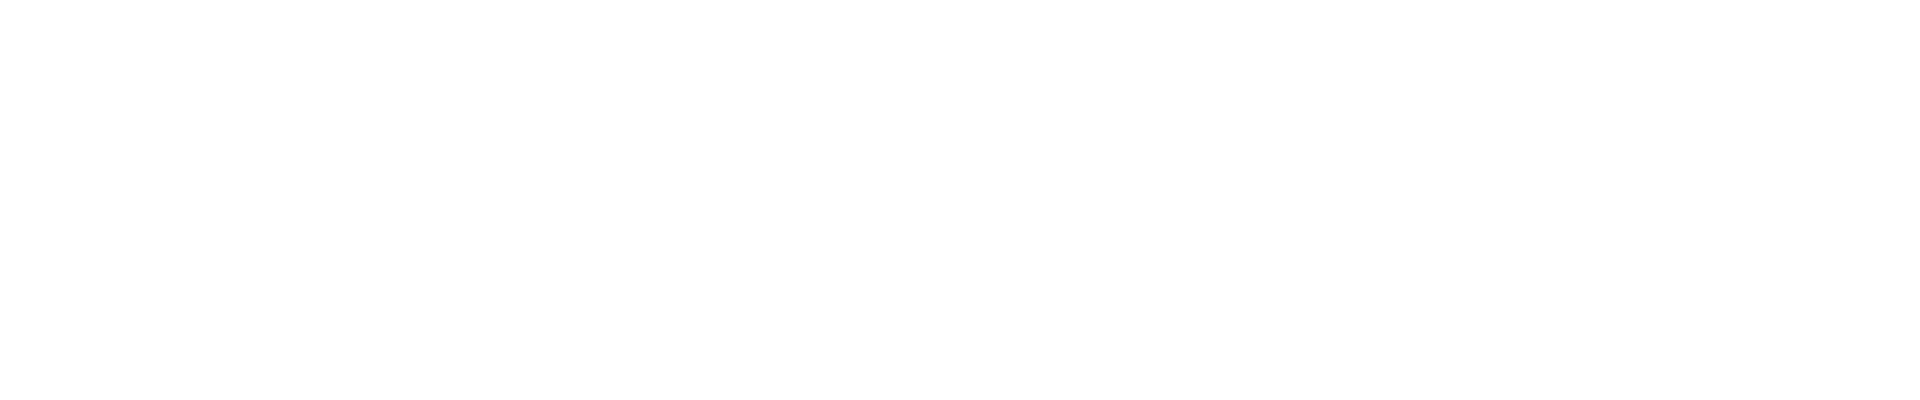 Clouds graphic